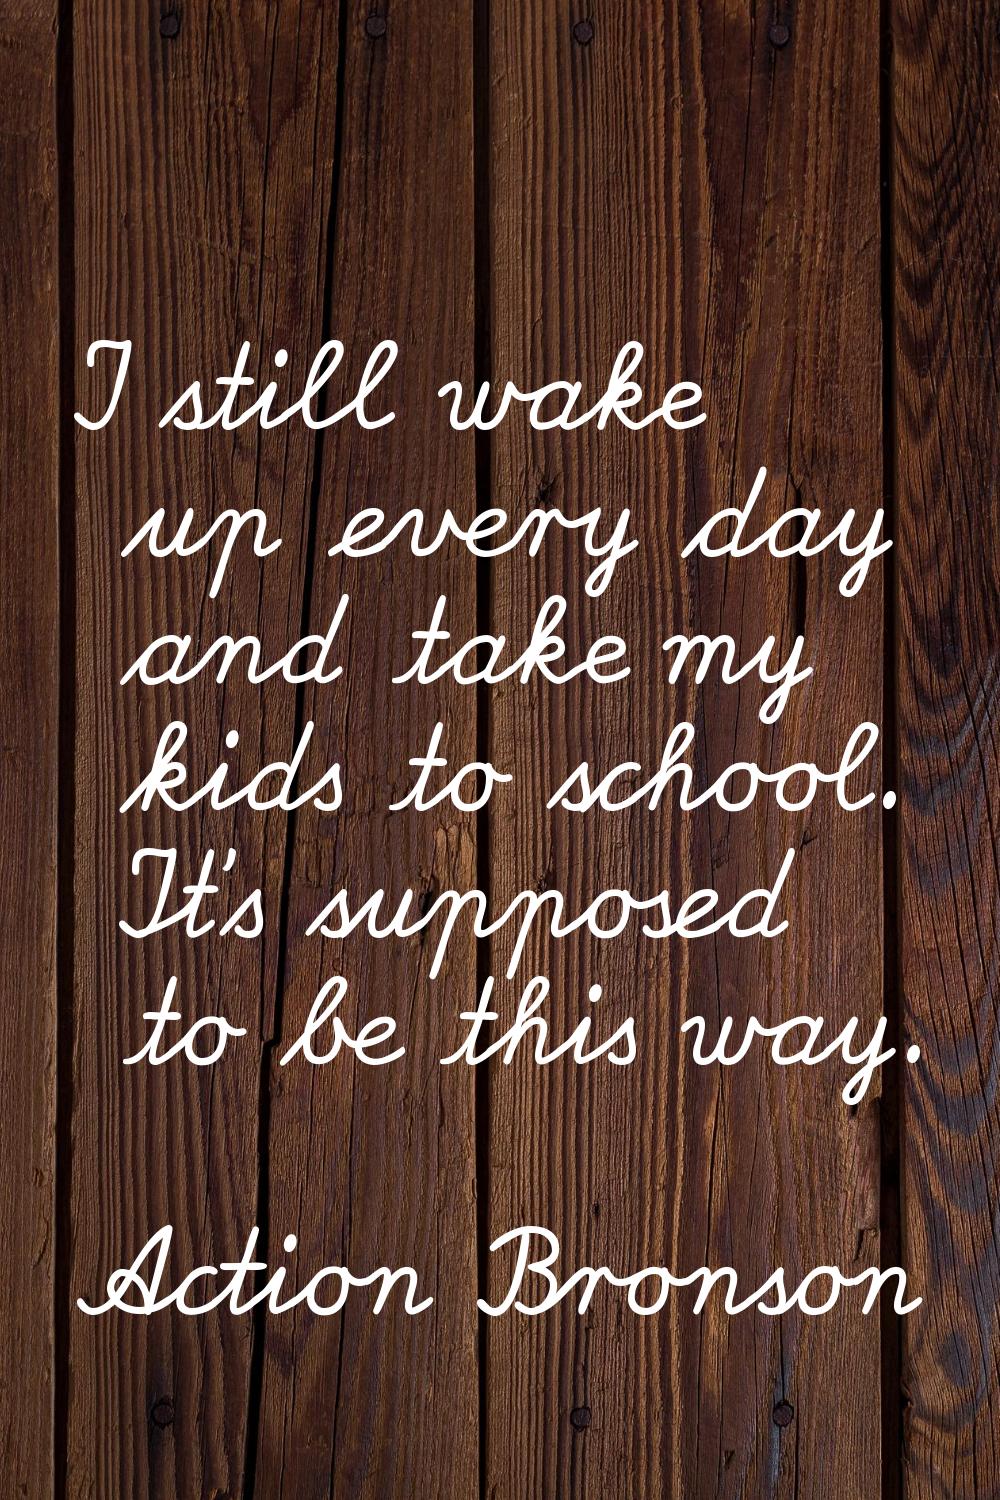 I still wake up every day and take my kids to school. It's supposed to be this way.